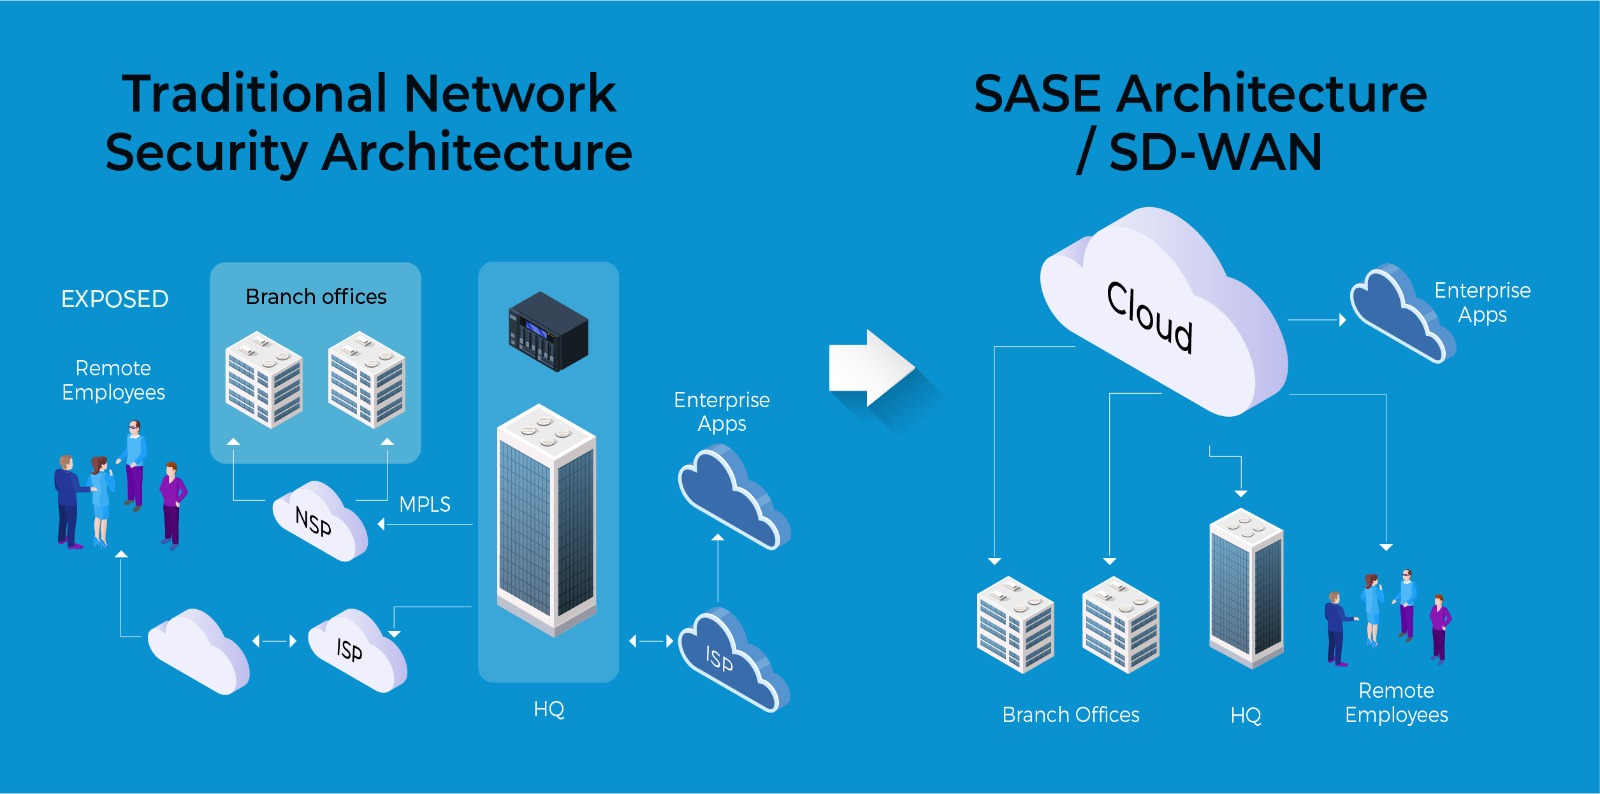 We show how traditional network security architecture can differ from SD-WAN, making it easier for your IT team to manage and secure your data and connections. 